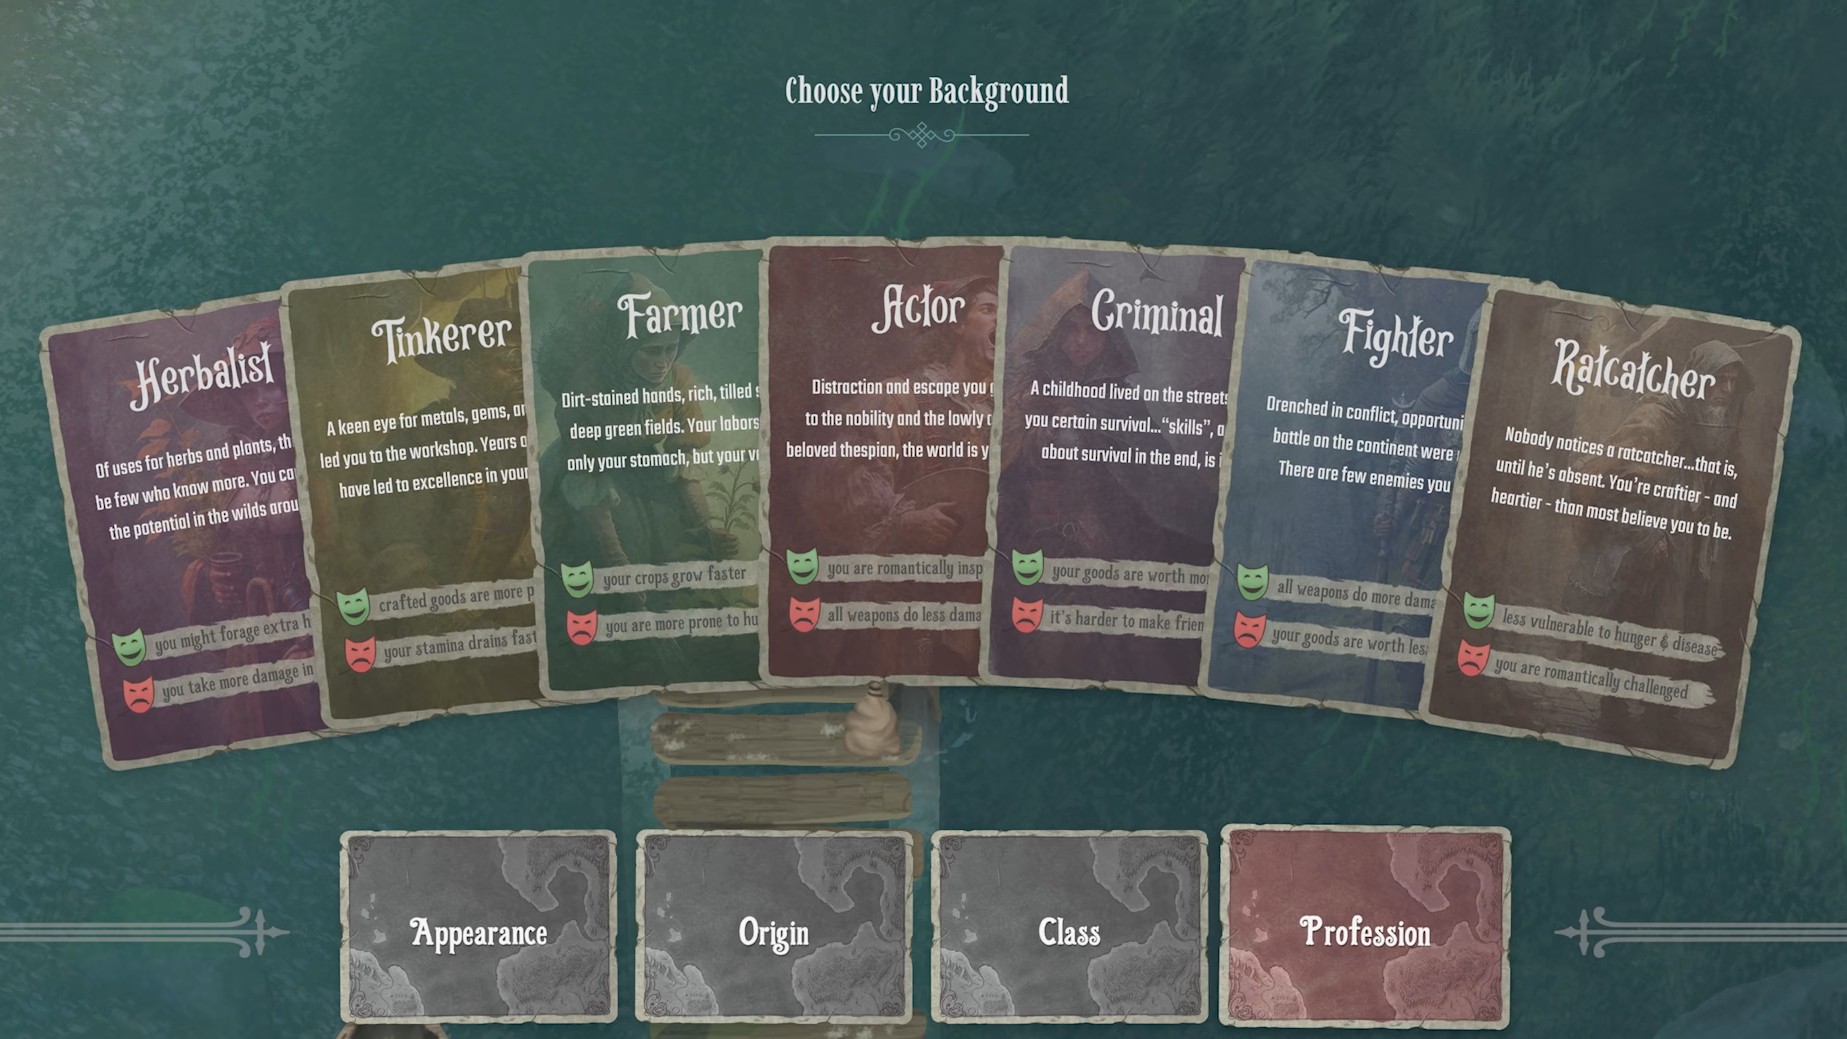 All character backgrounds displayed on cards in Mirthwood